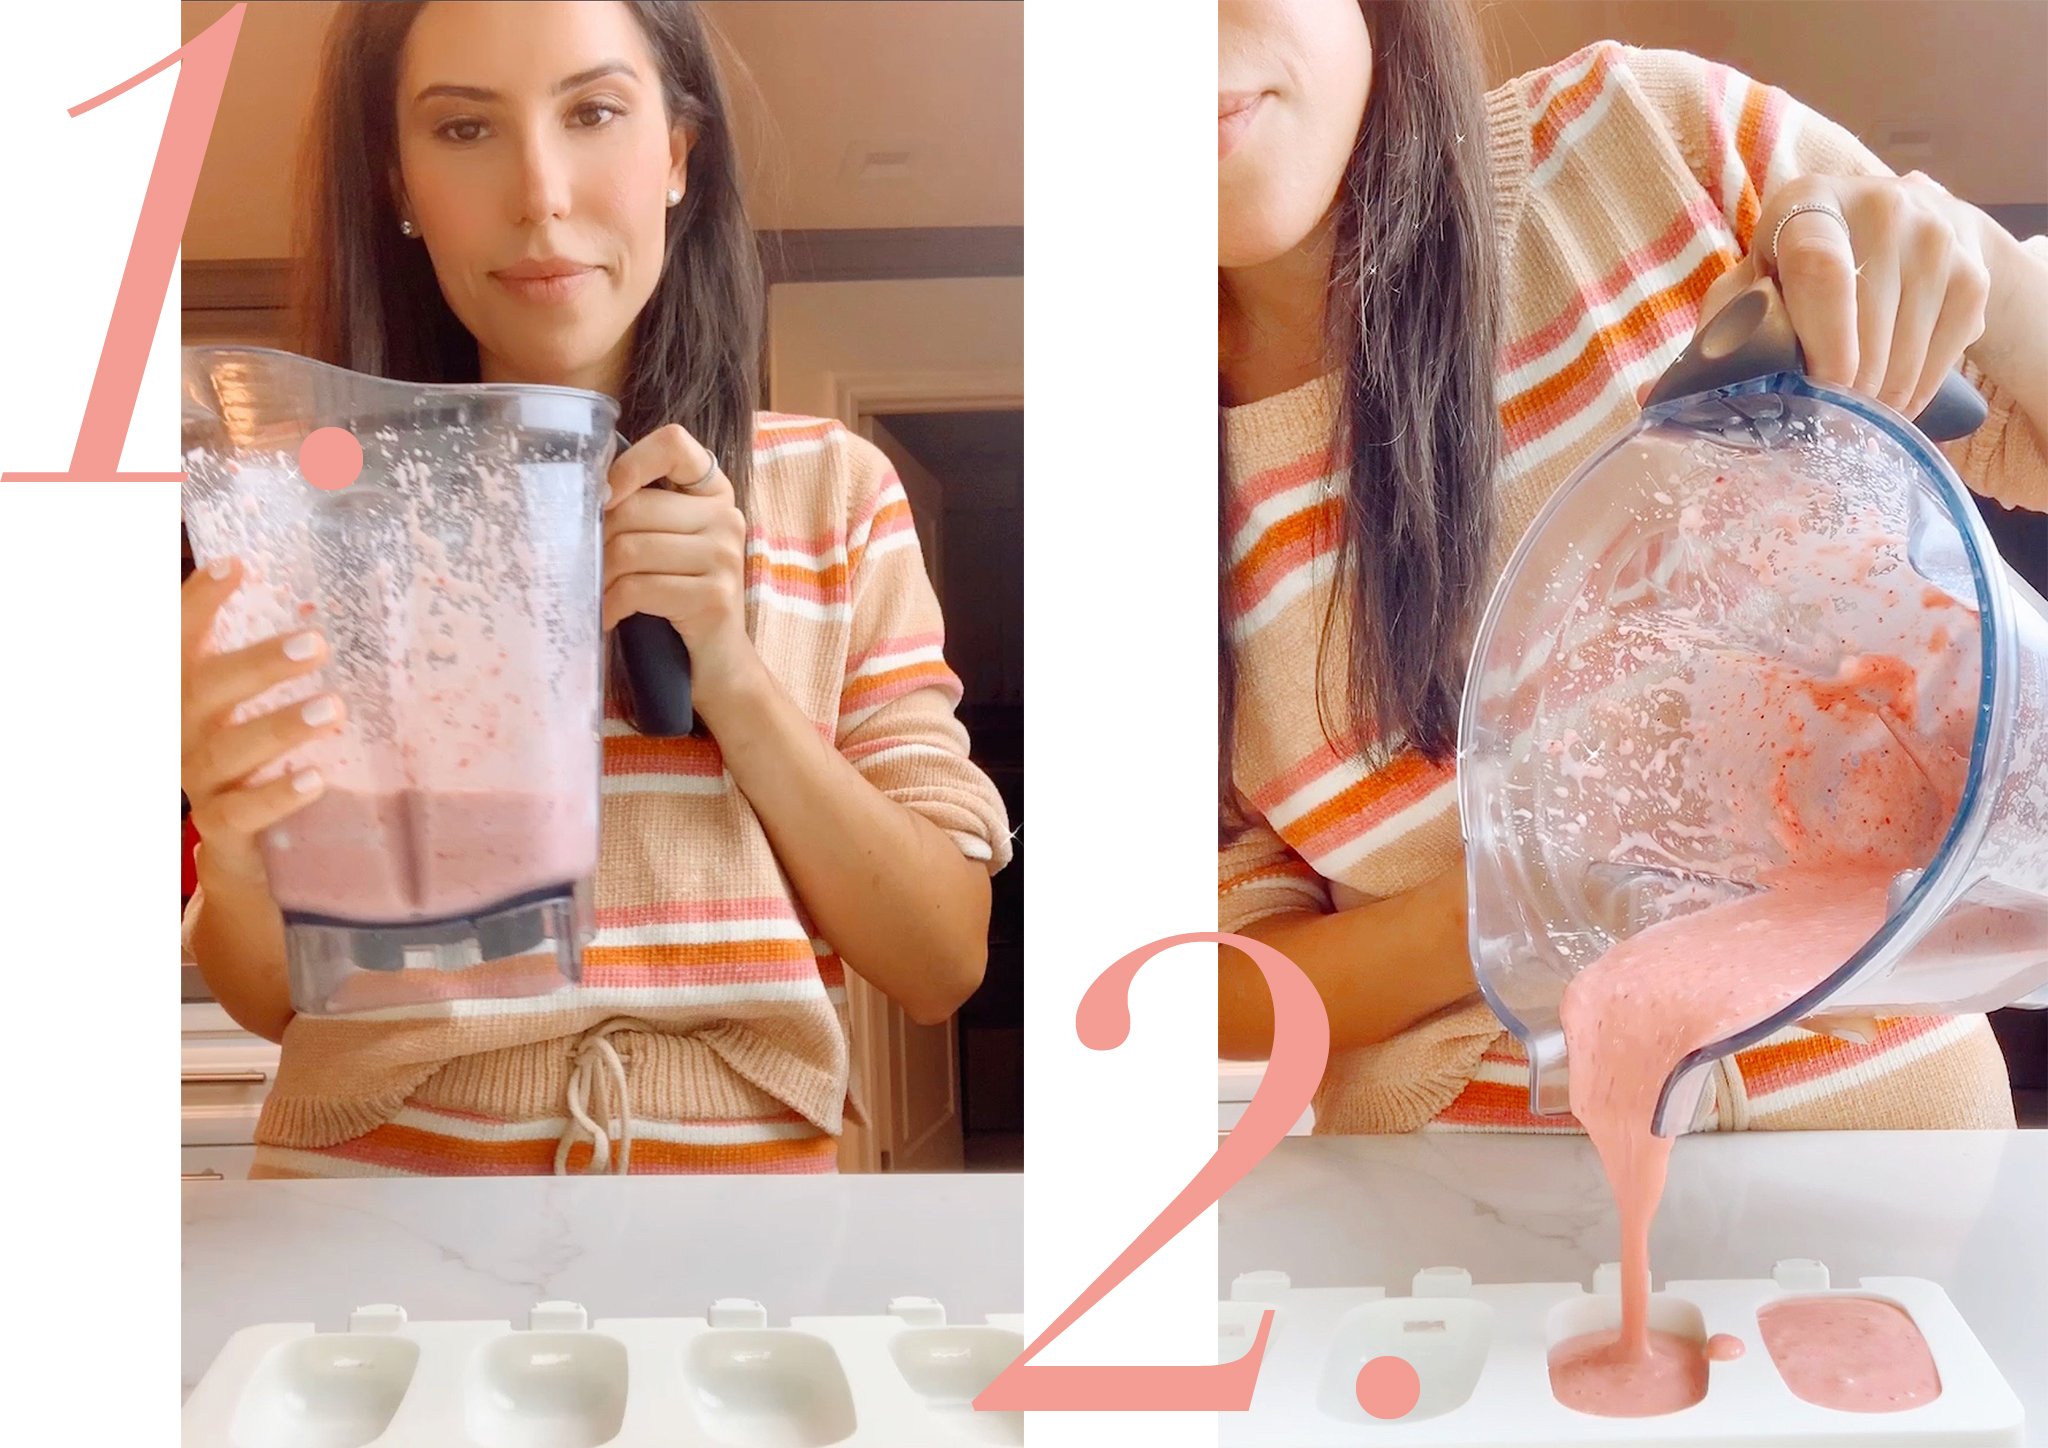 1. shelly bella blending ingredients 2. pouring ingredients into popsicle mold